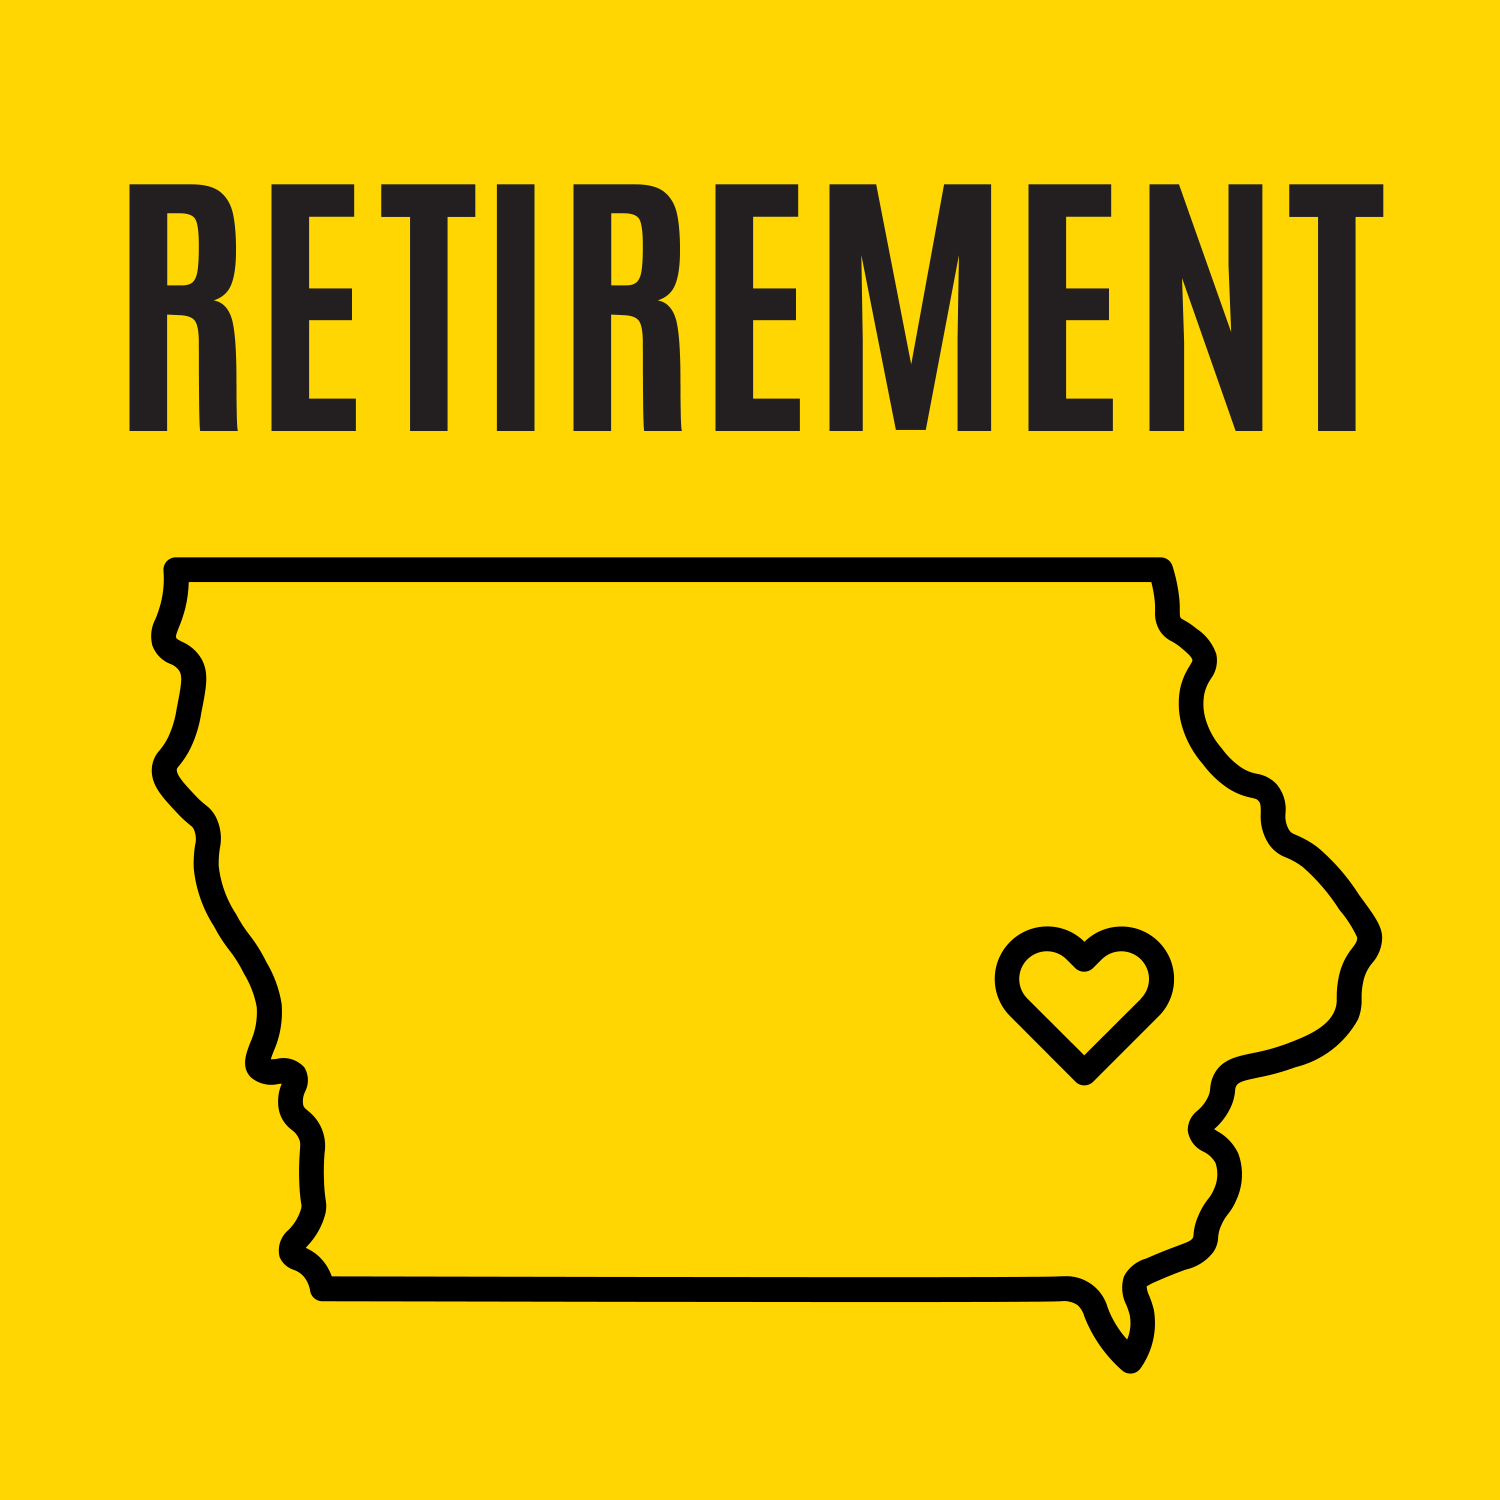 says retirement in black with outline of state of Iowa and heart near Iowa City on gold